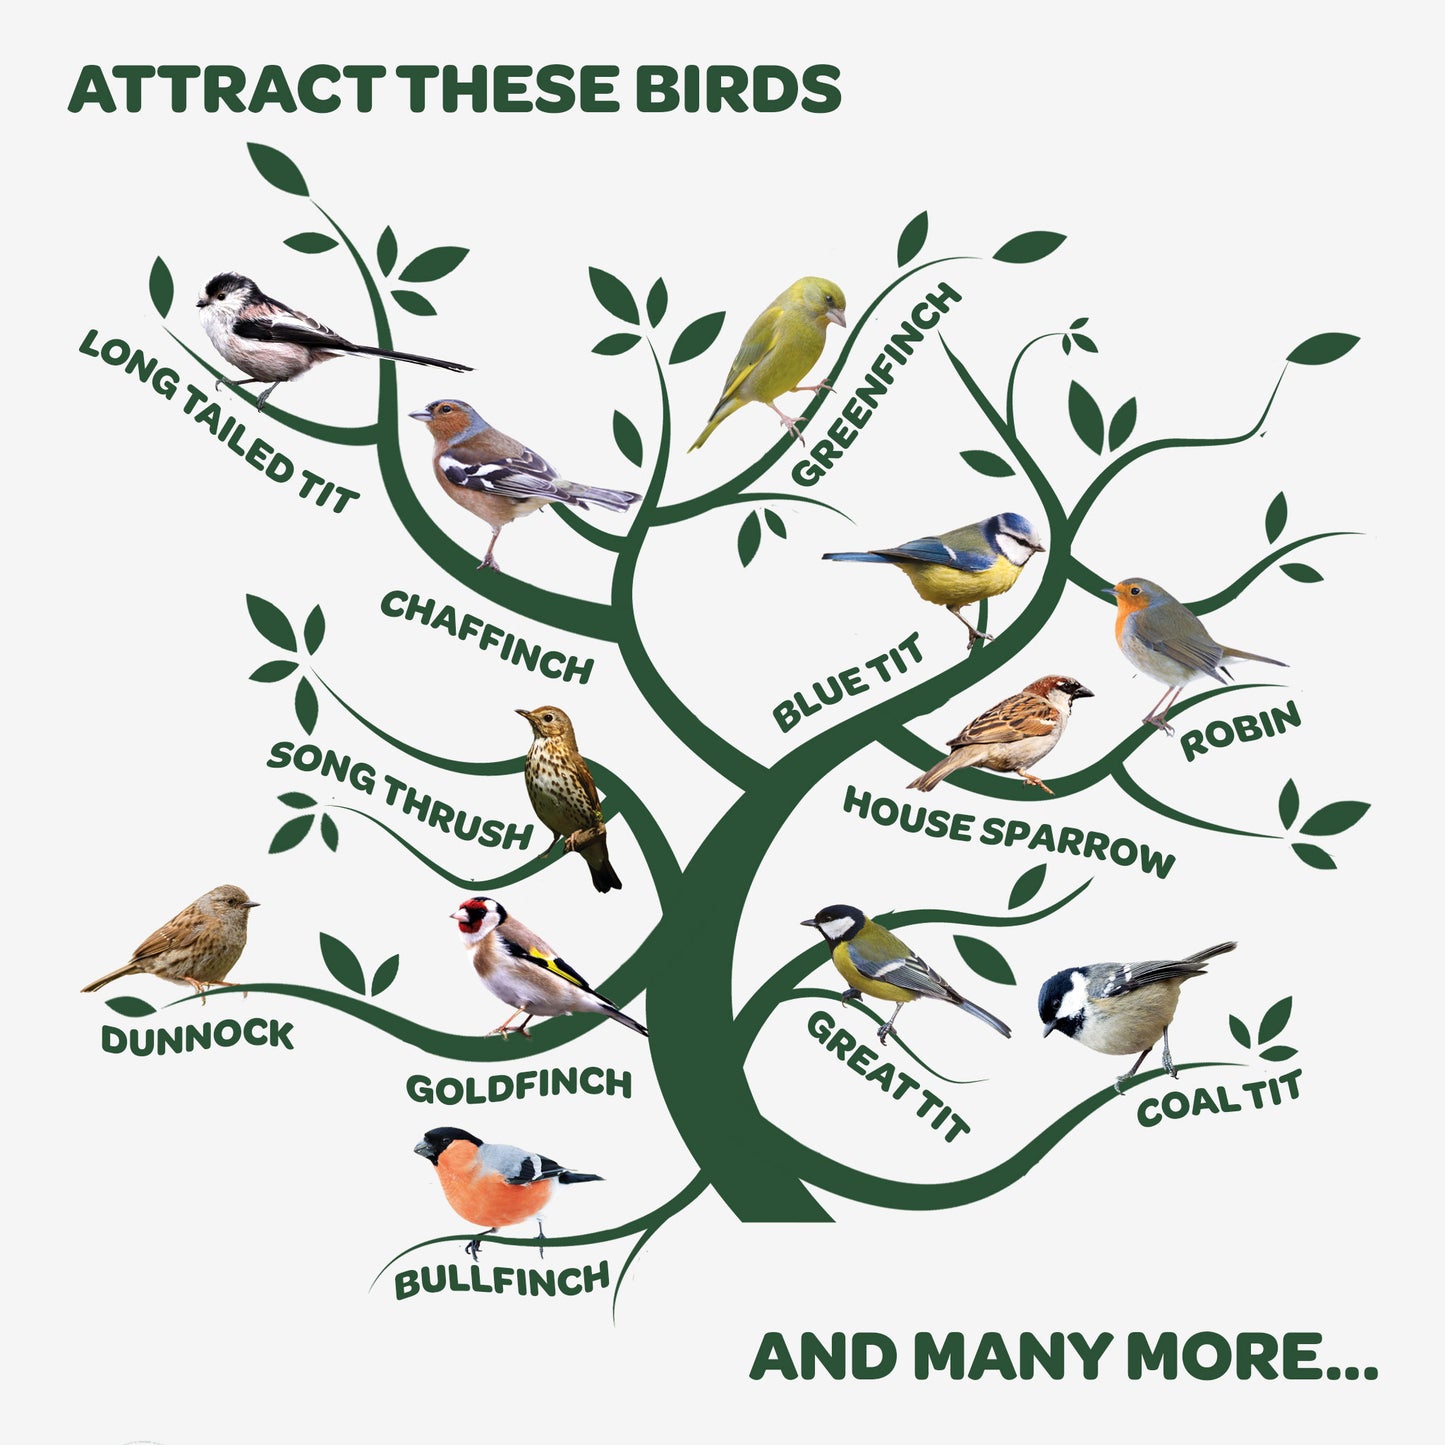 Peckish Mealworms attracts these birds infographic